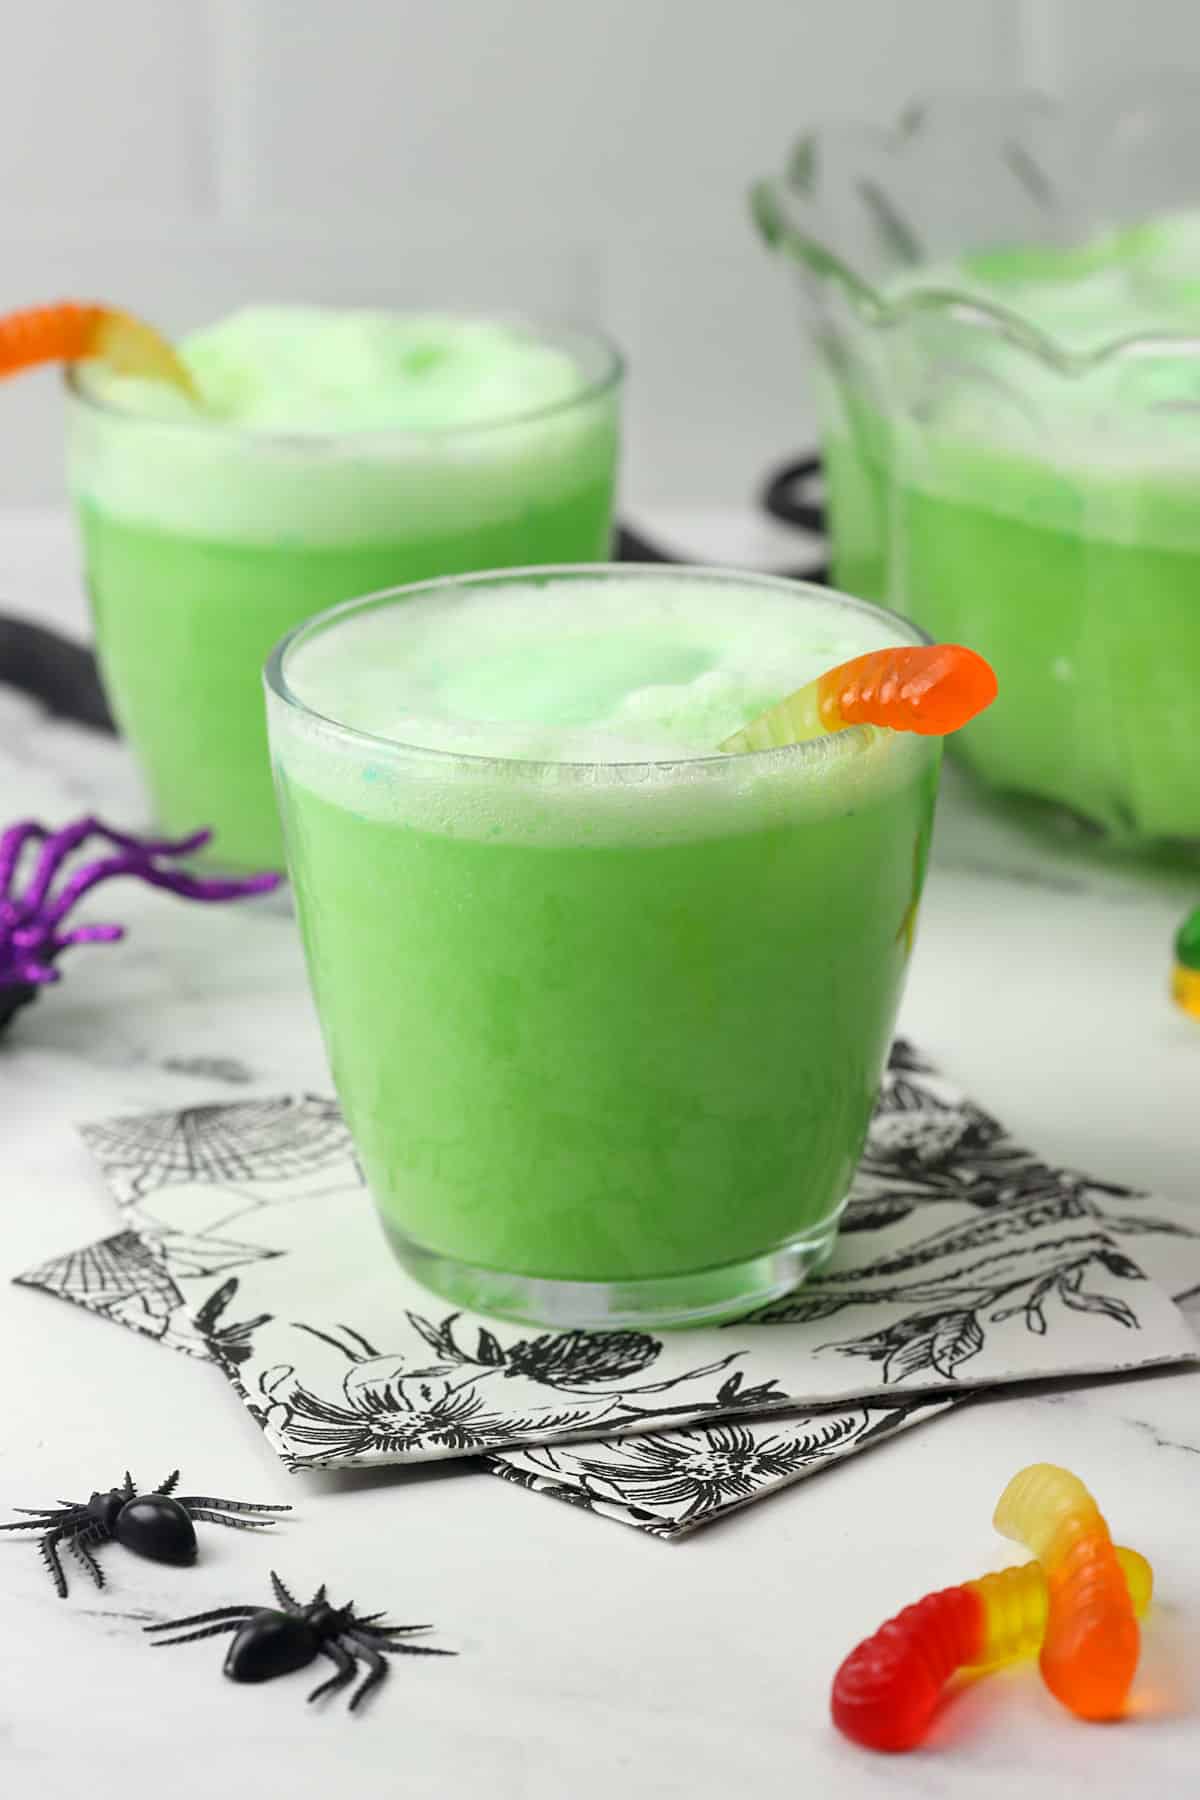 Close up of a glass of green Halloween punch with a gummy worm garnish.